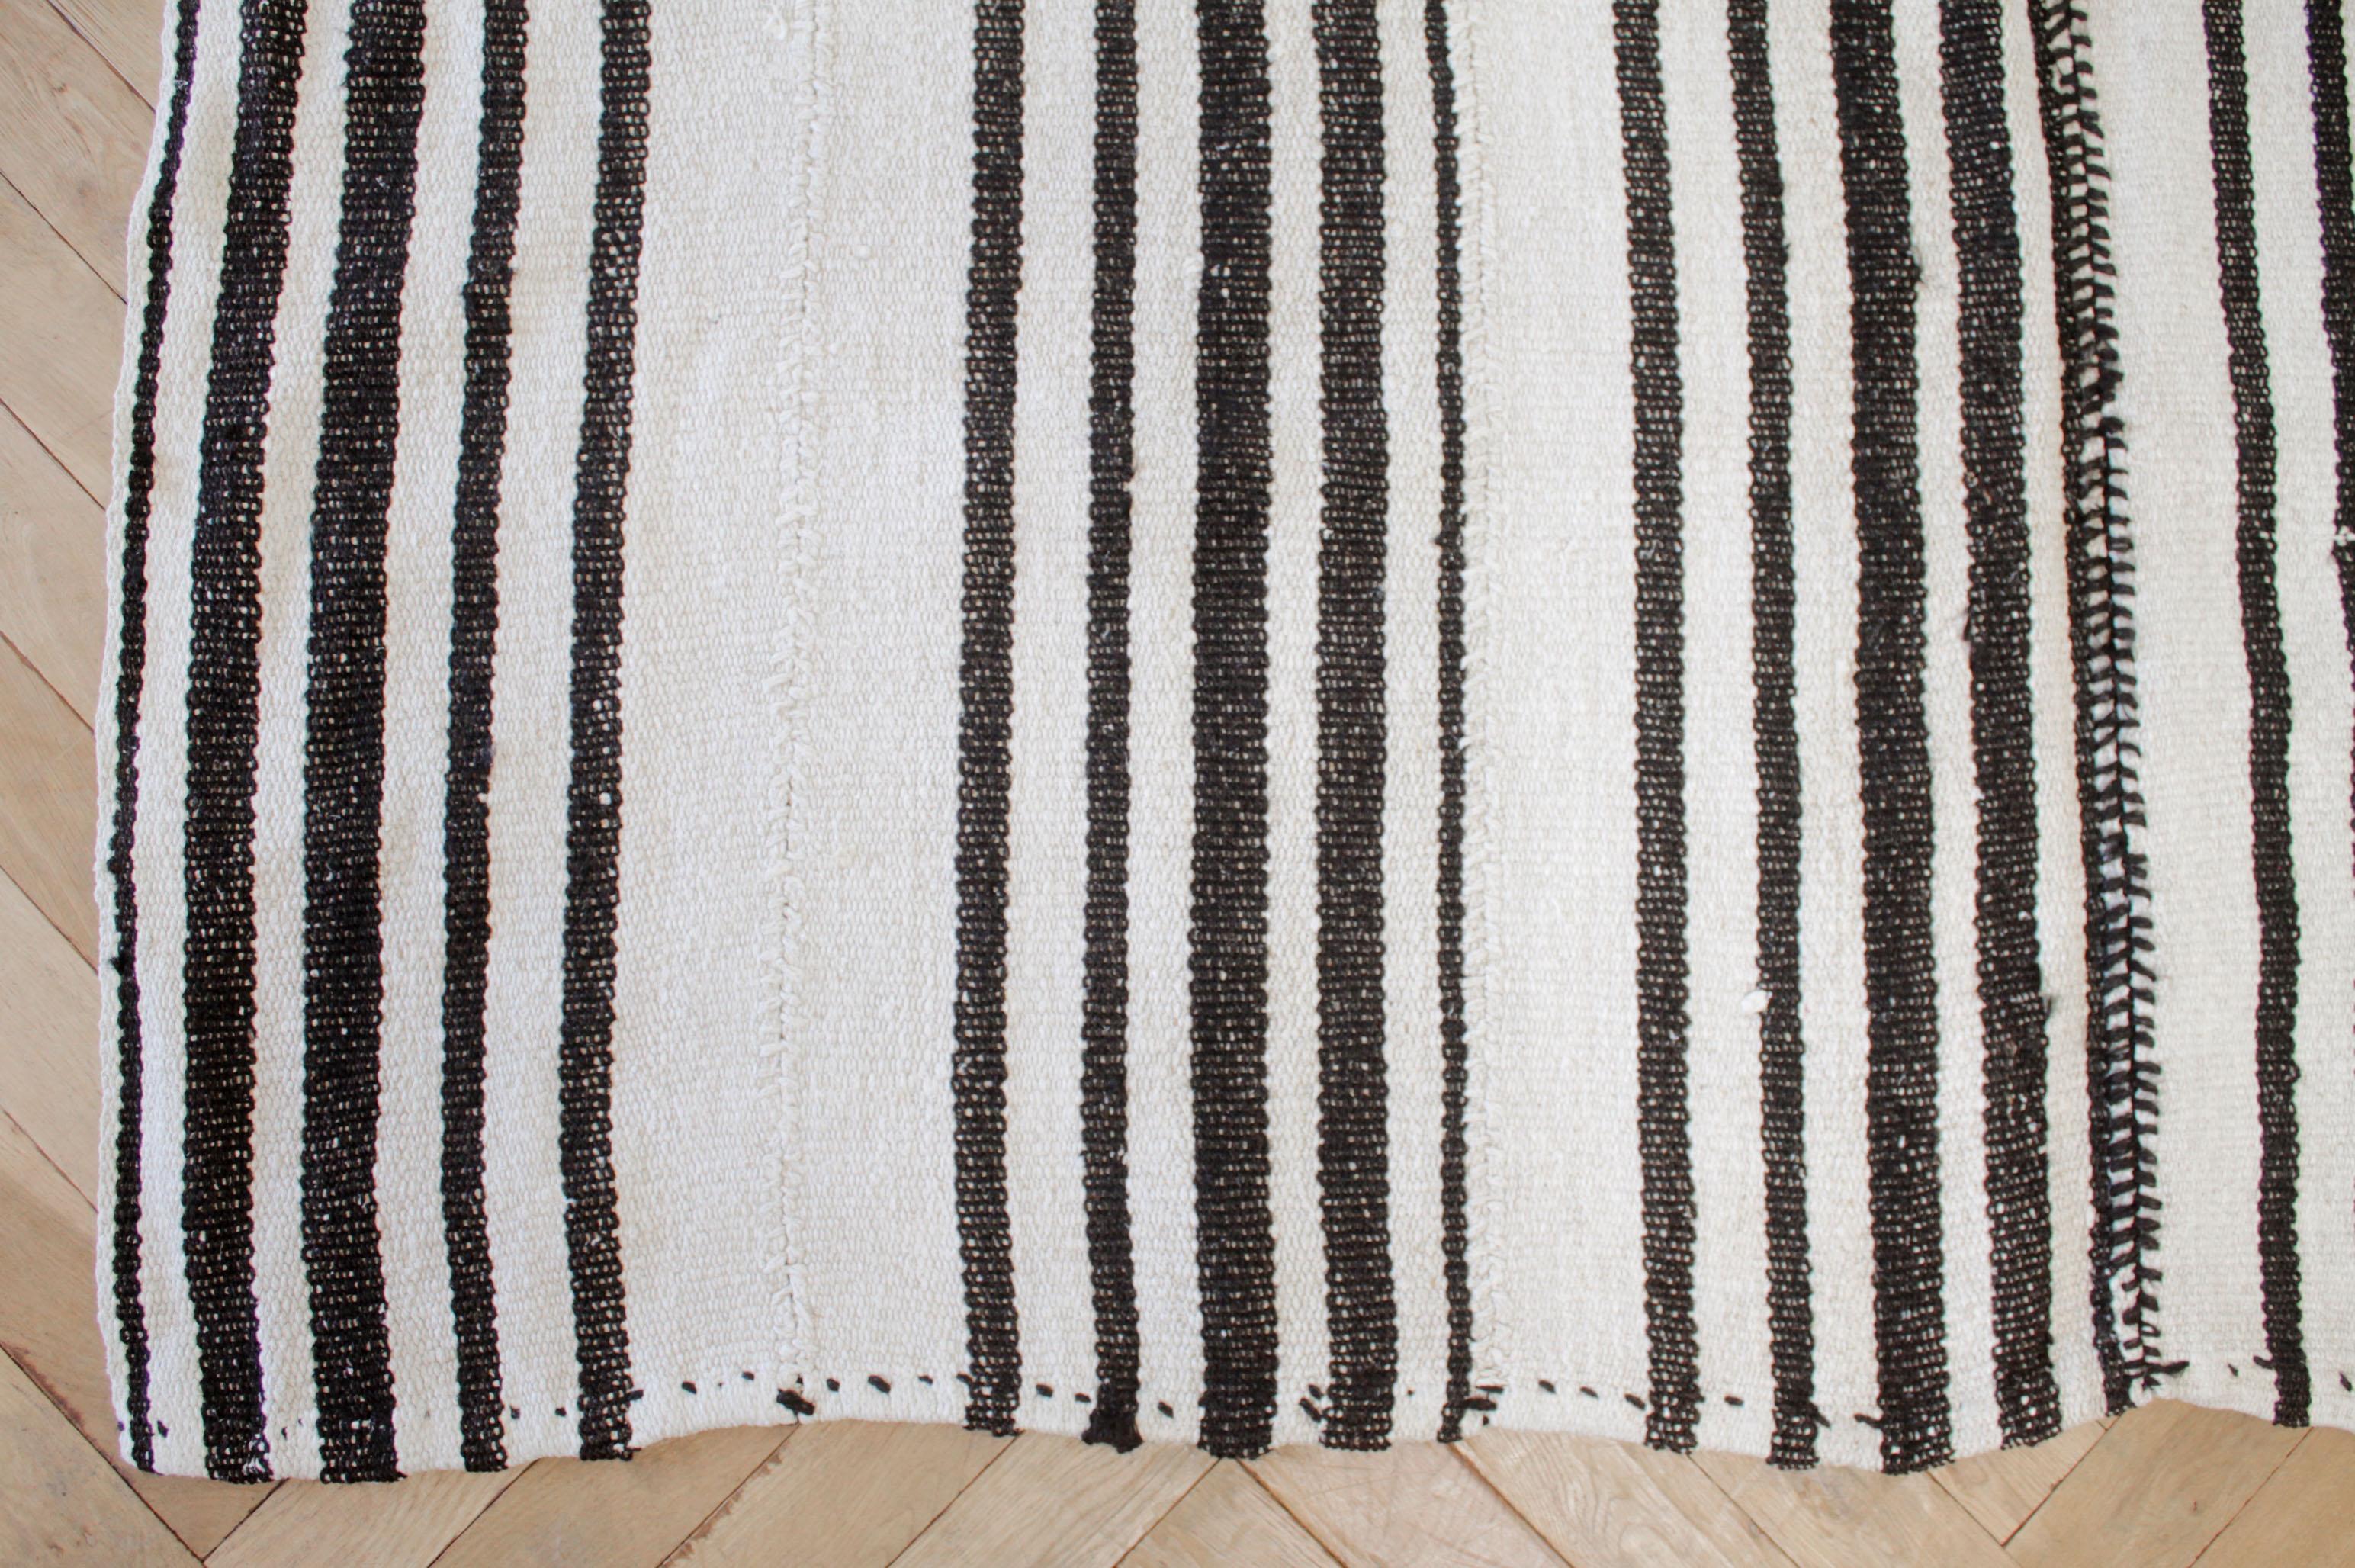 Jeremy rug
Vintage flat-weave hemp stripe Turkish rug white with dark brown stripes.
Flat-weave, hemp, make these extremely durable with great use for high traffic areas. This item has been cleaned, and is ready for use.
Rug size: 75